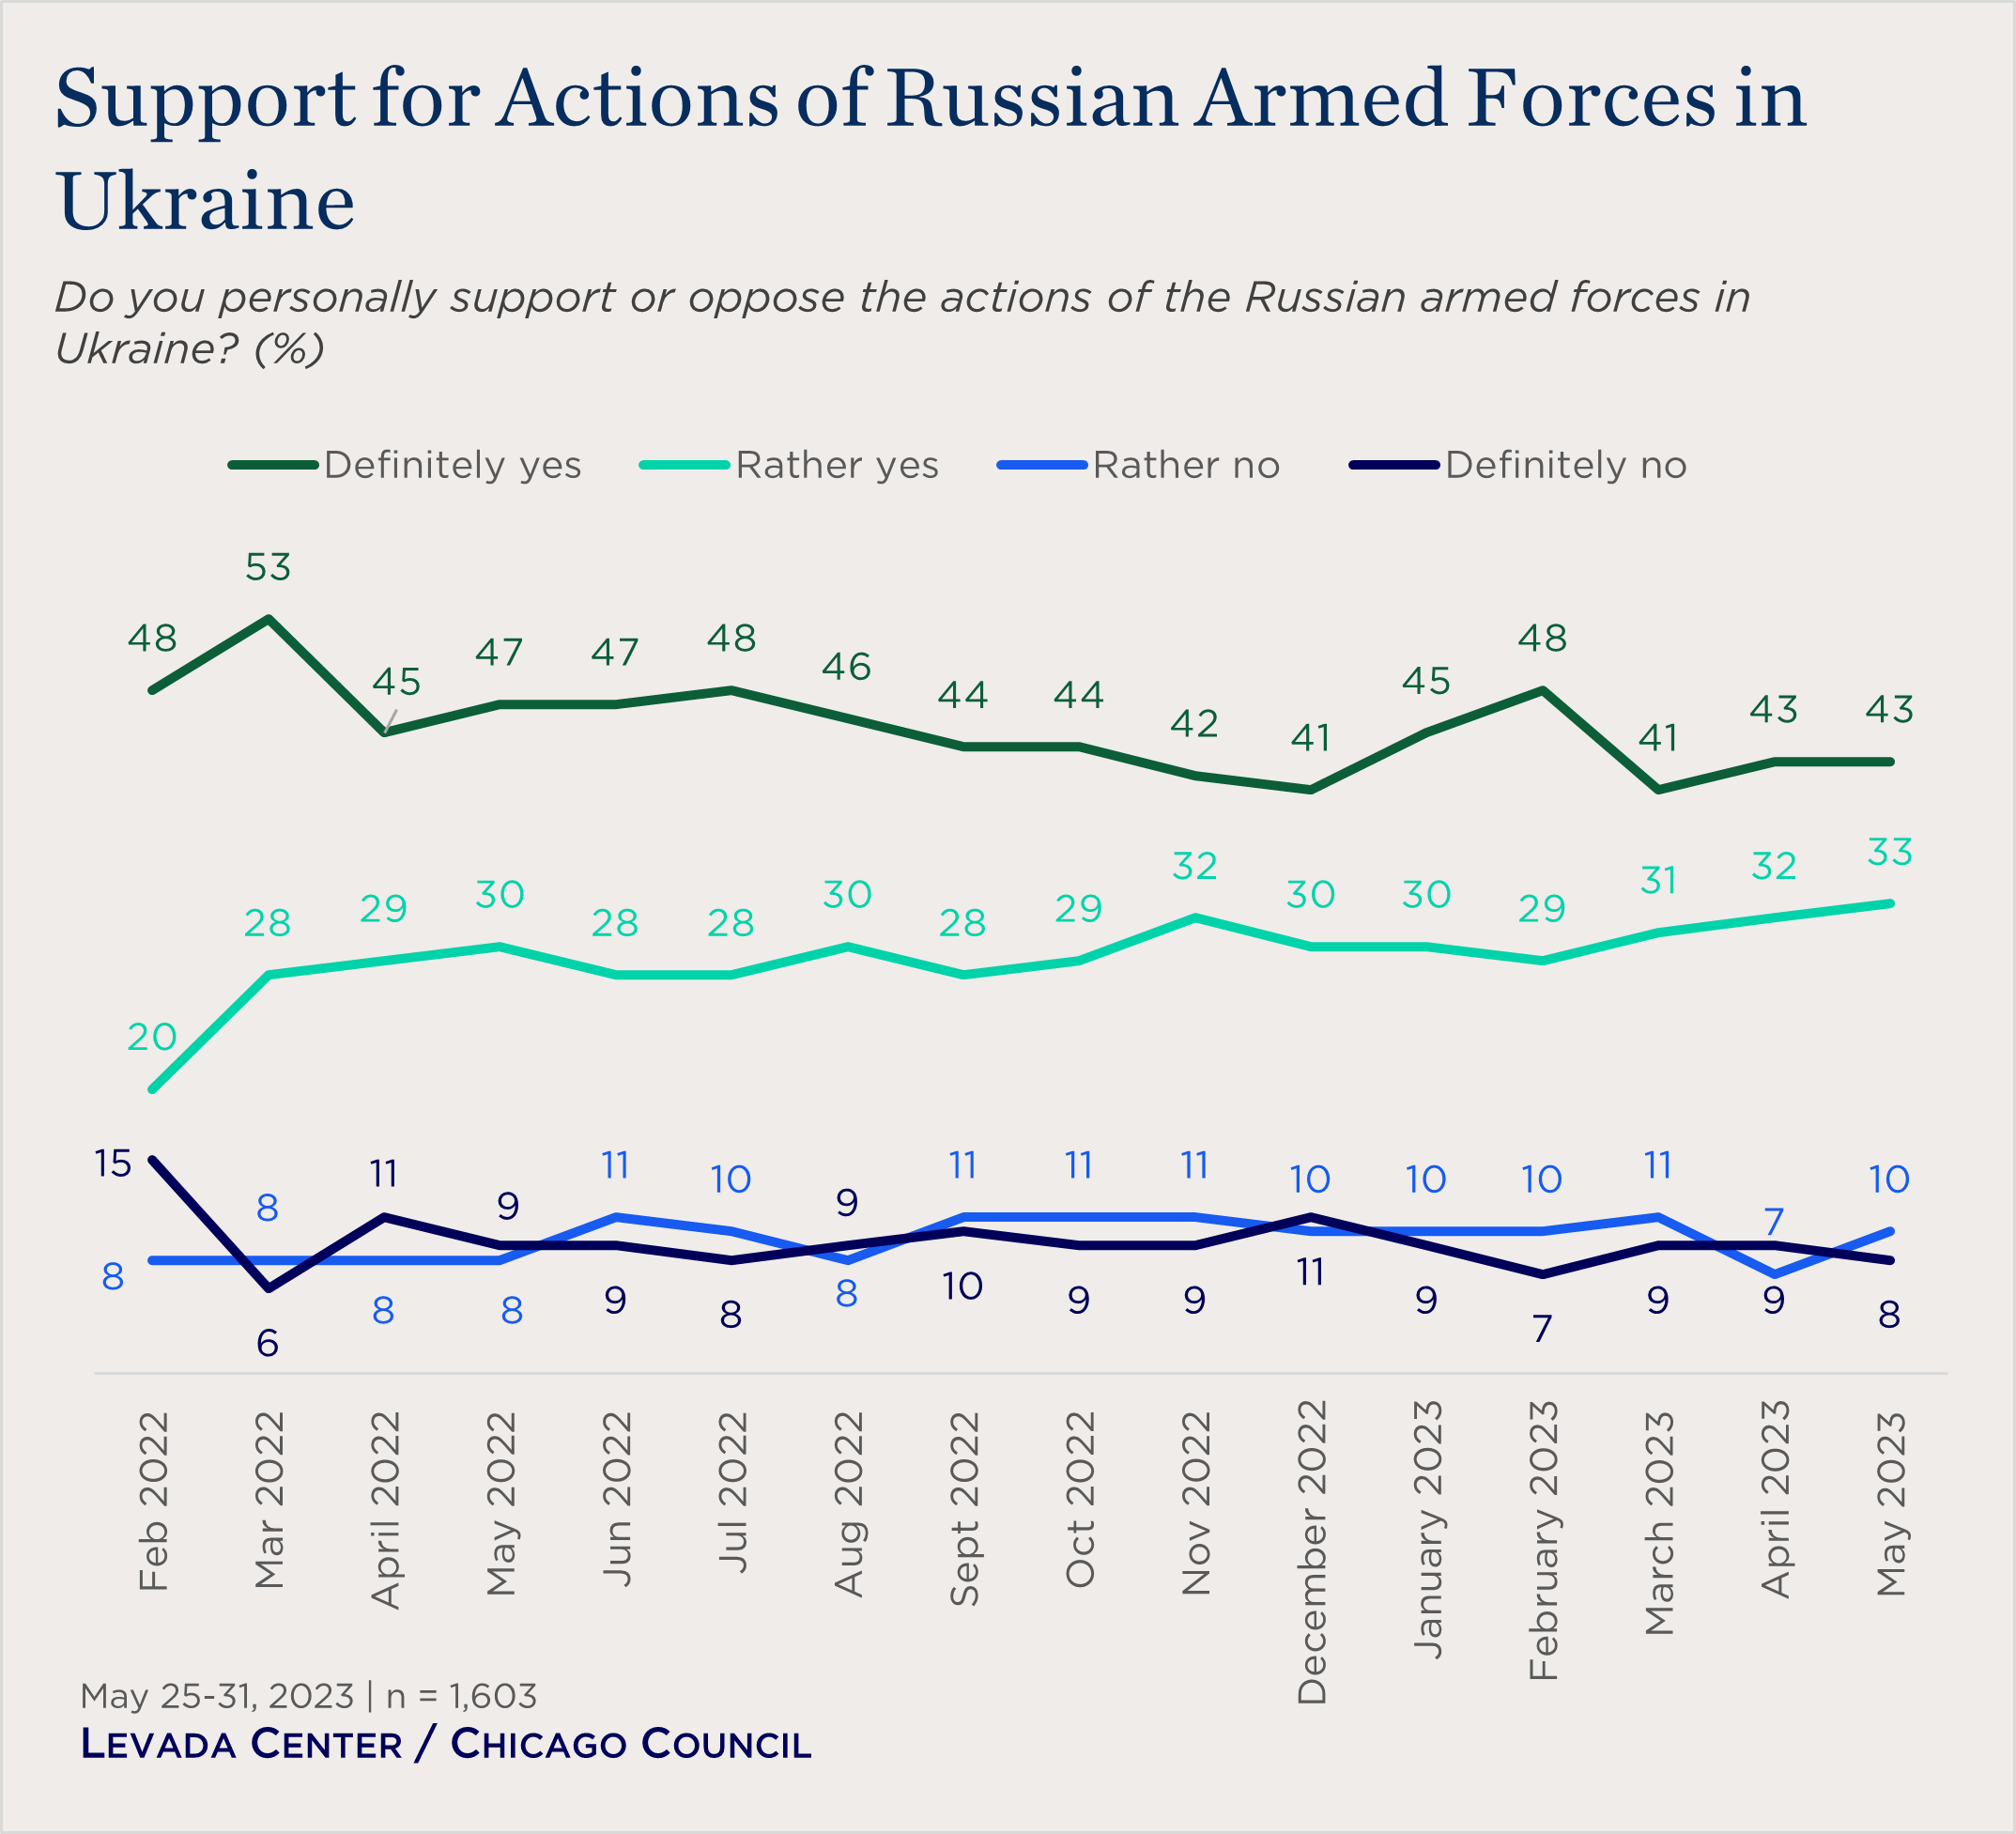 line chart showing support for actions of Russian armed forces in Ukraine over time